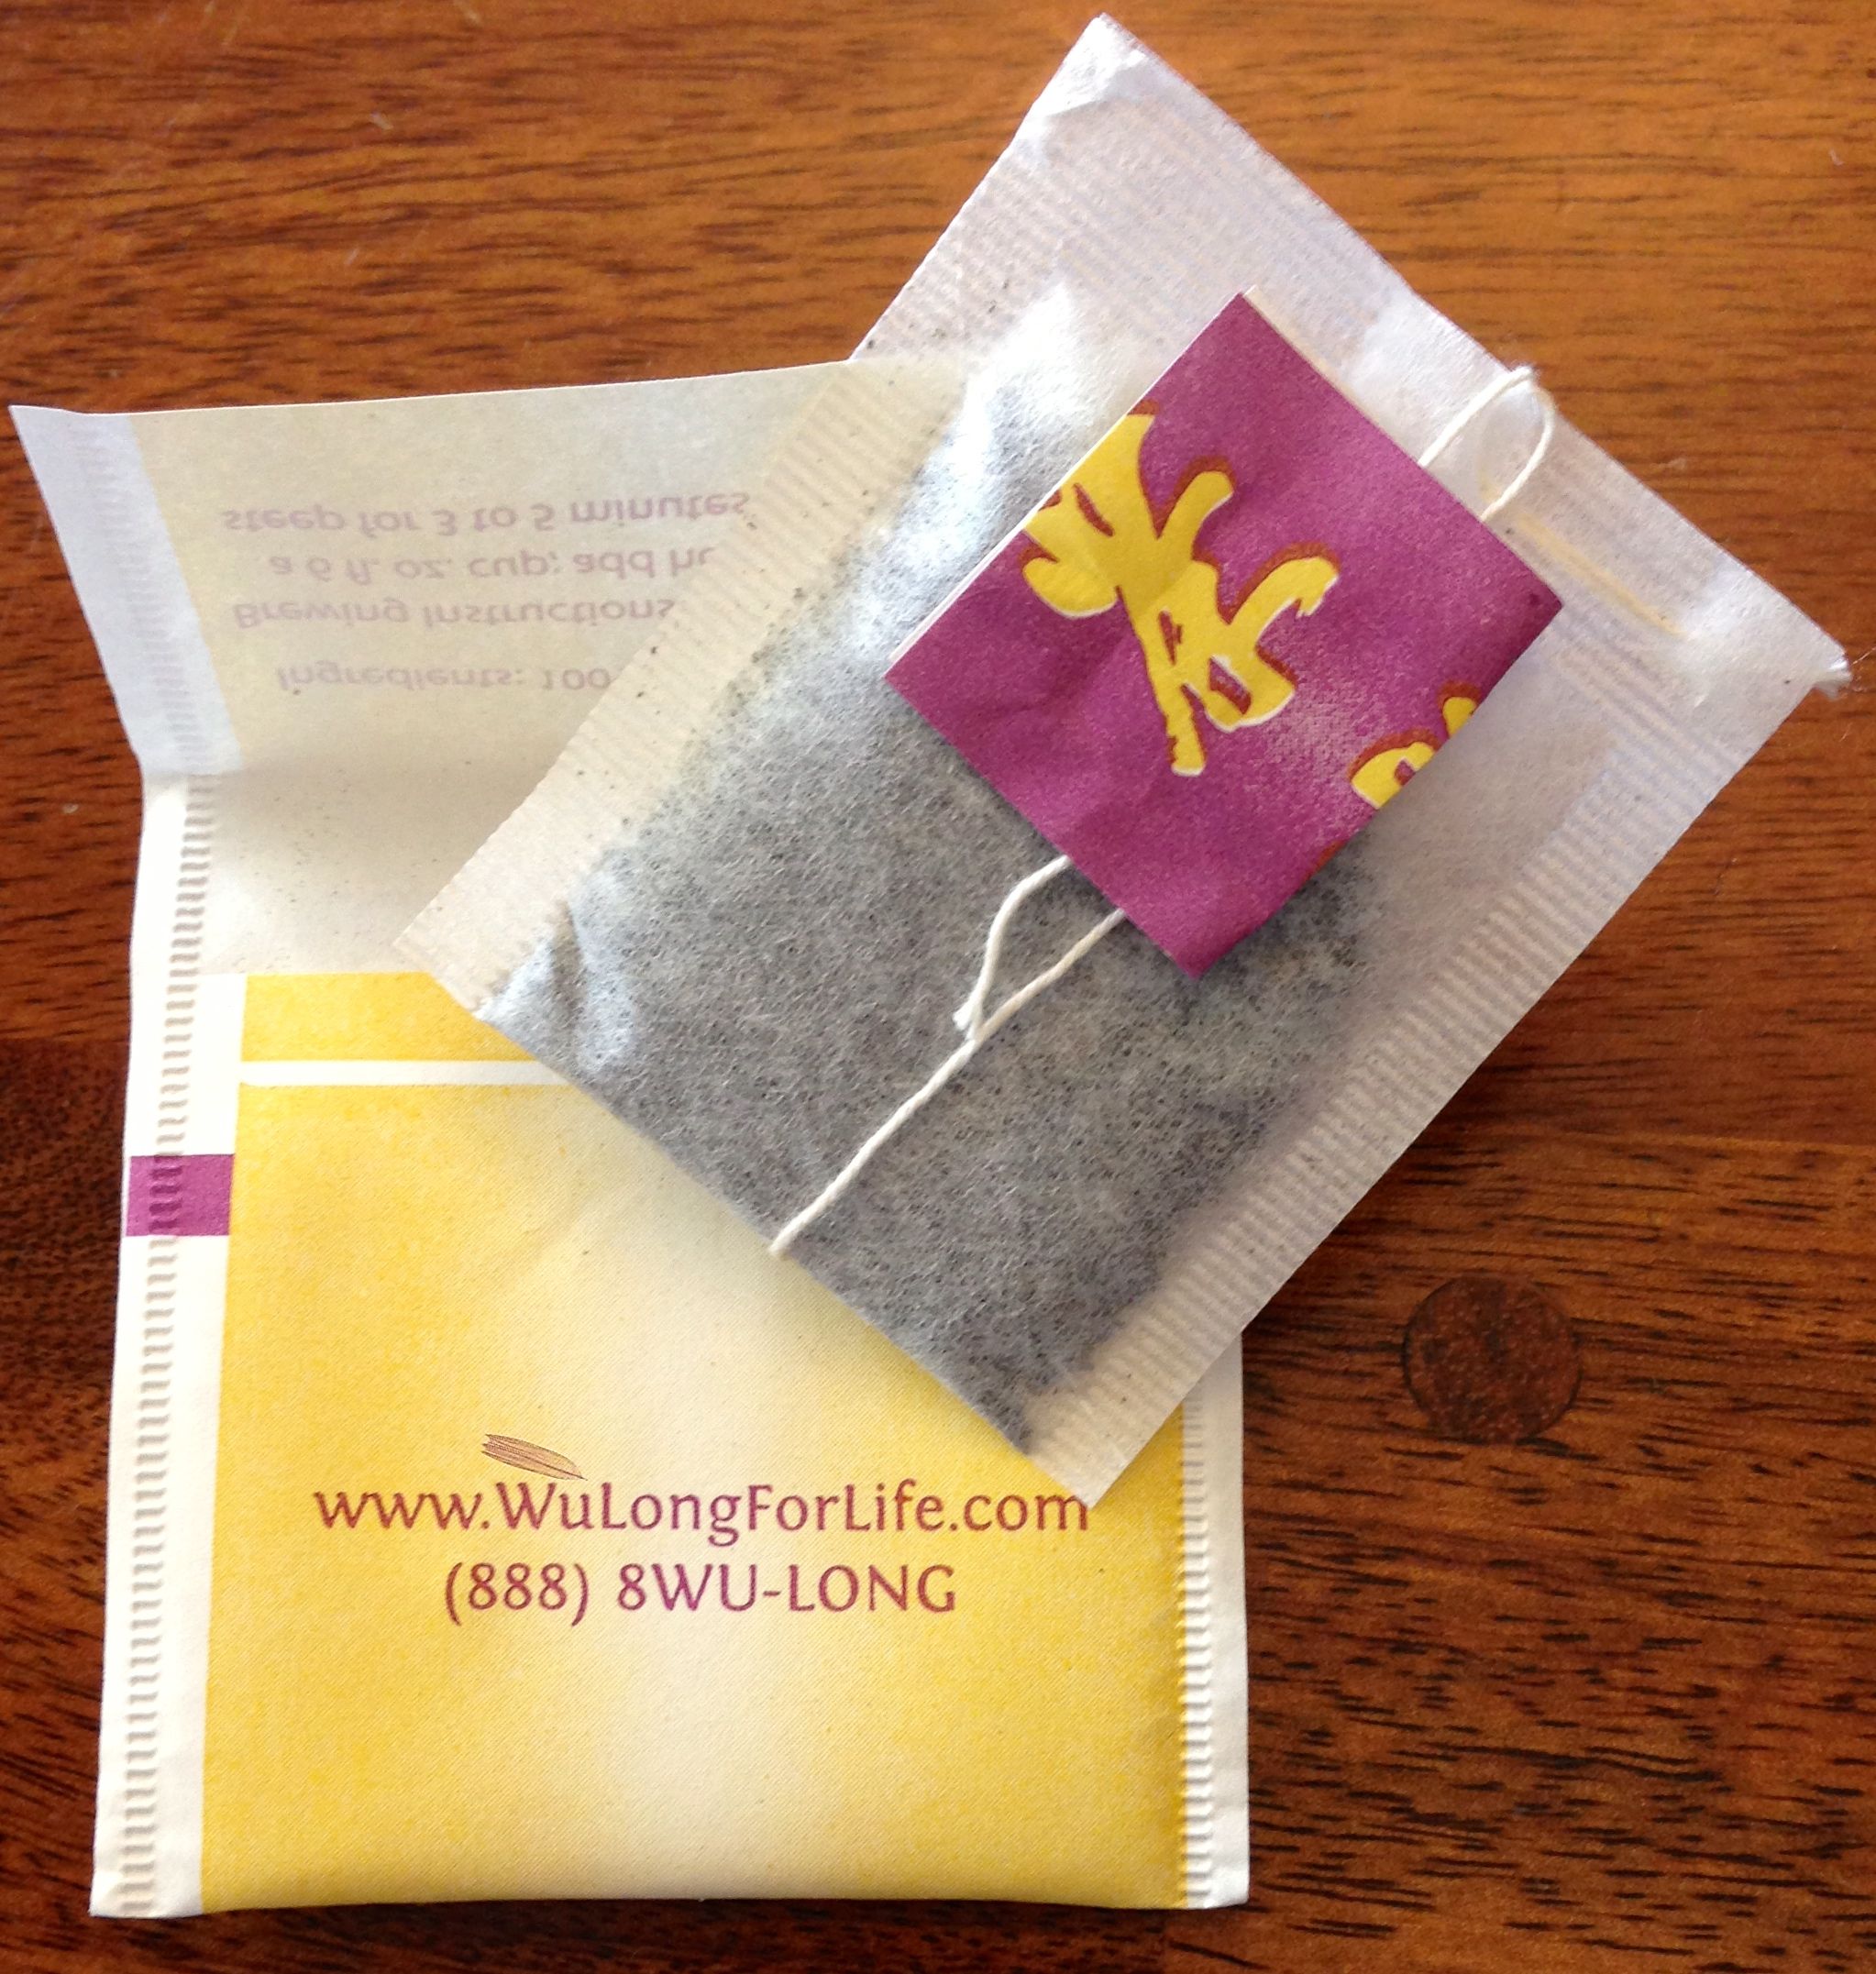 Science or Not, Wu-Long Slimming Tea is Awesome!